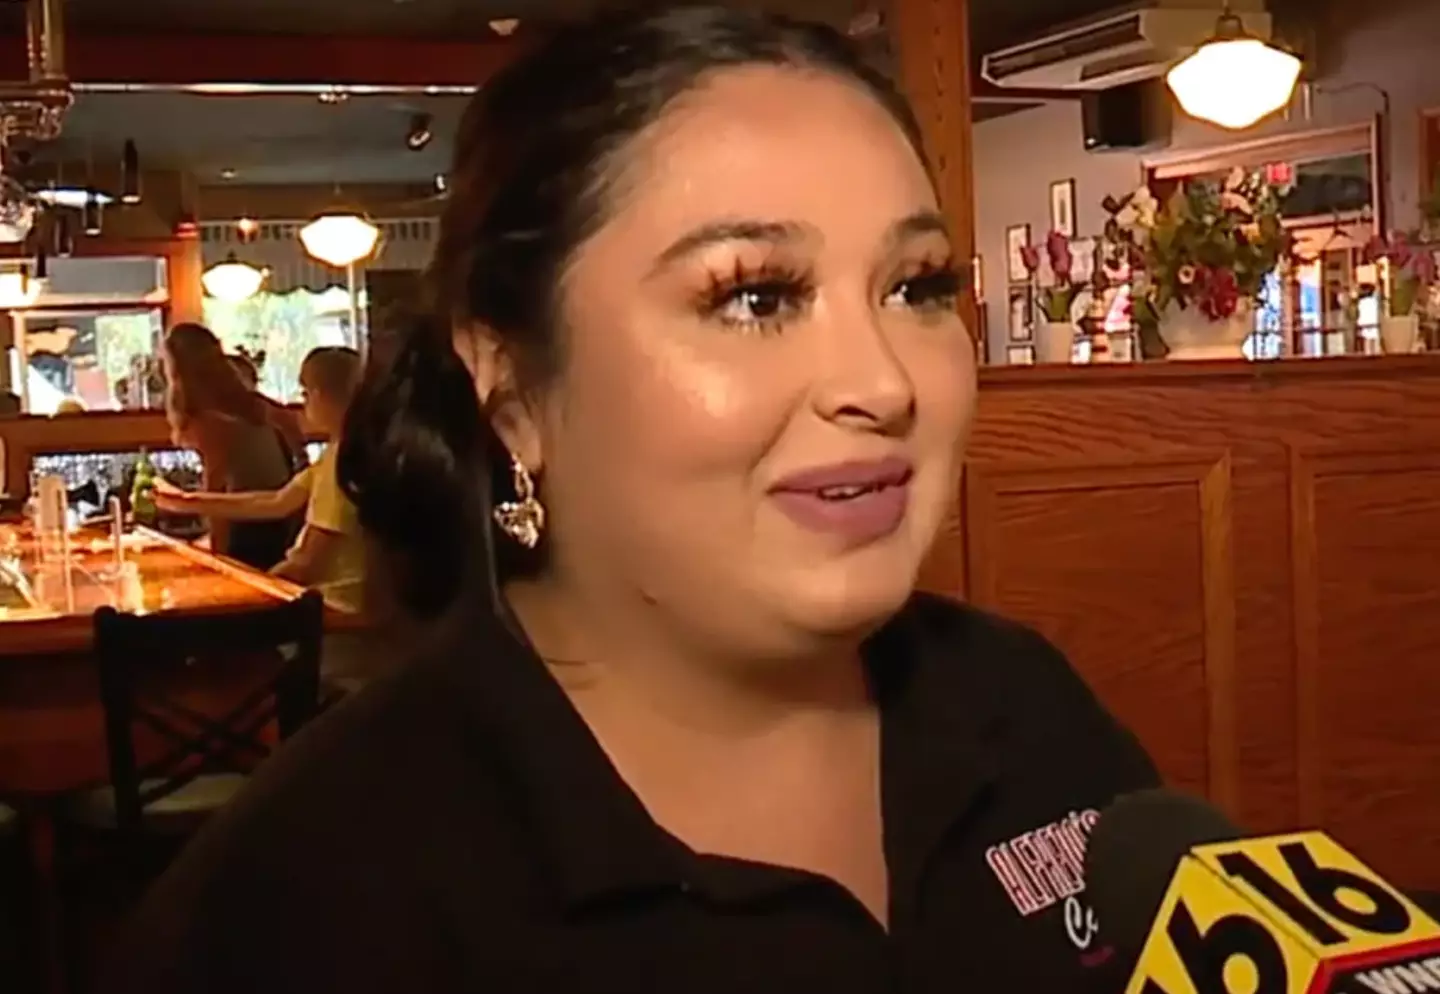 A $3,000 tip left for a waitress in Scranton, Pennsylvania, has become a total pain in the backside for staff at Alfredo's Cafe.